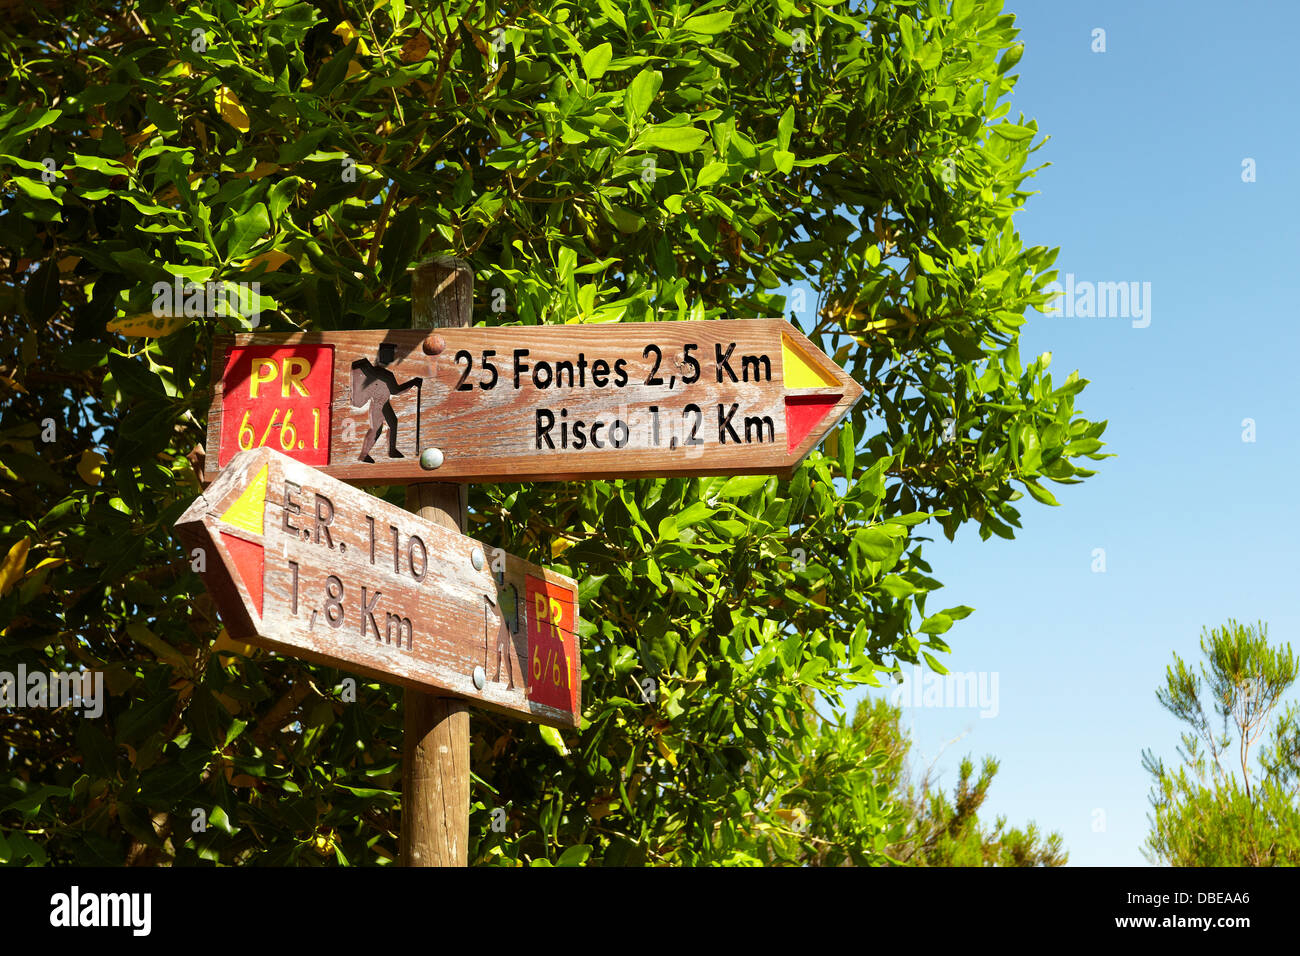 A signpost to 25 Fontes and Risco Levada, Rabacal, Madeira Island, Portugal Stock Photo